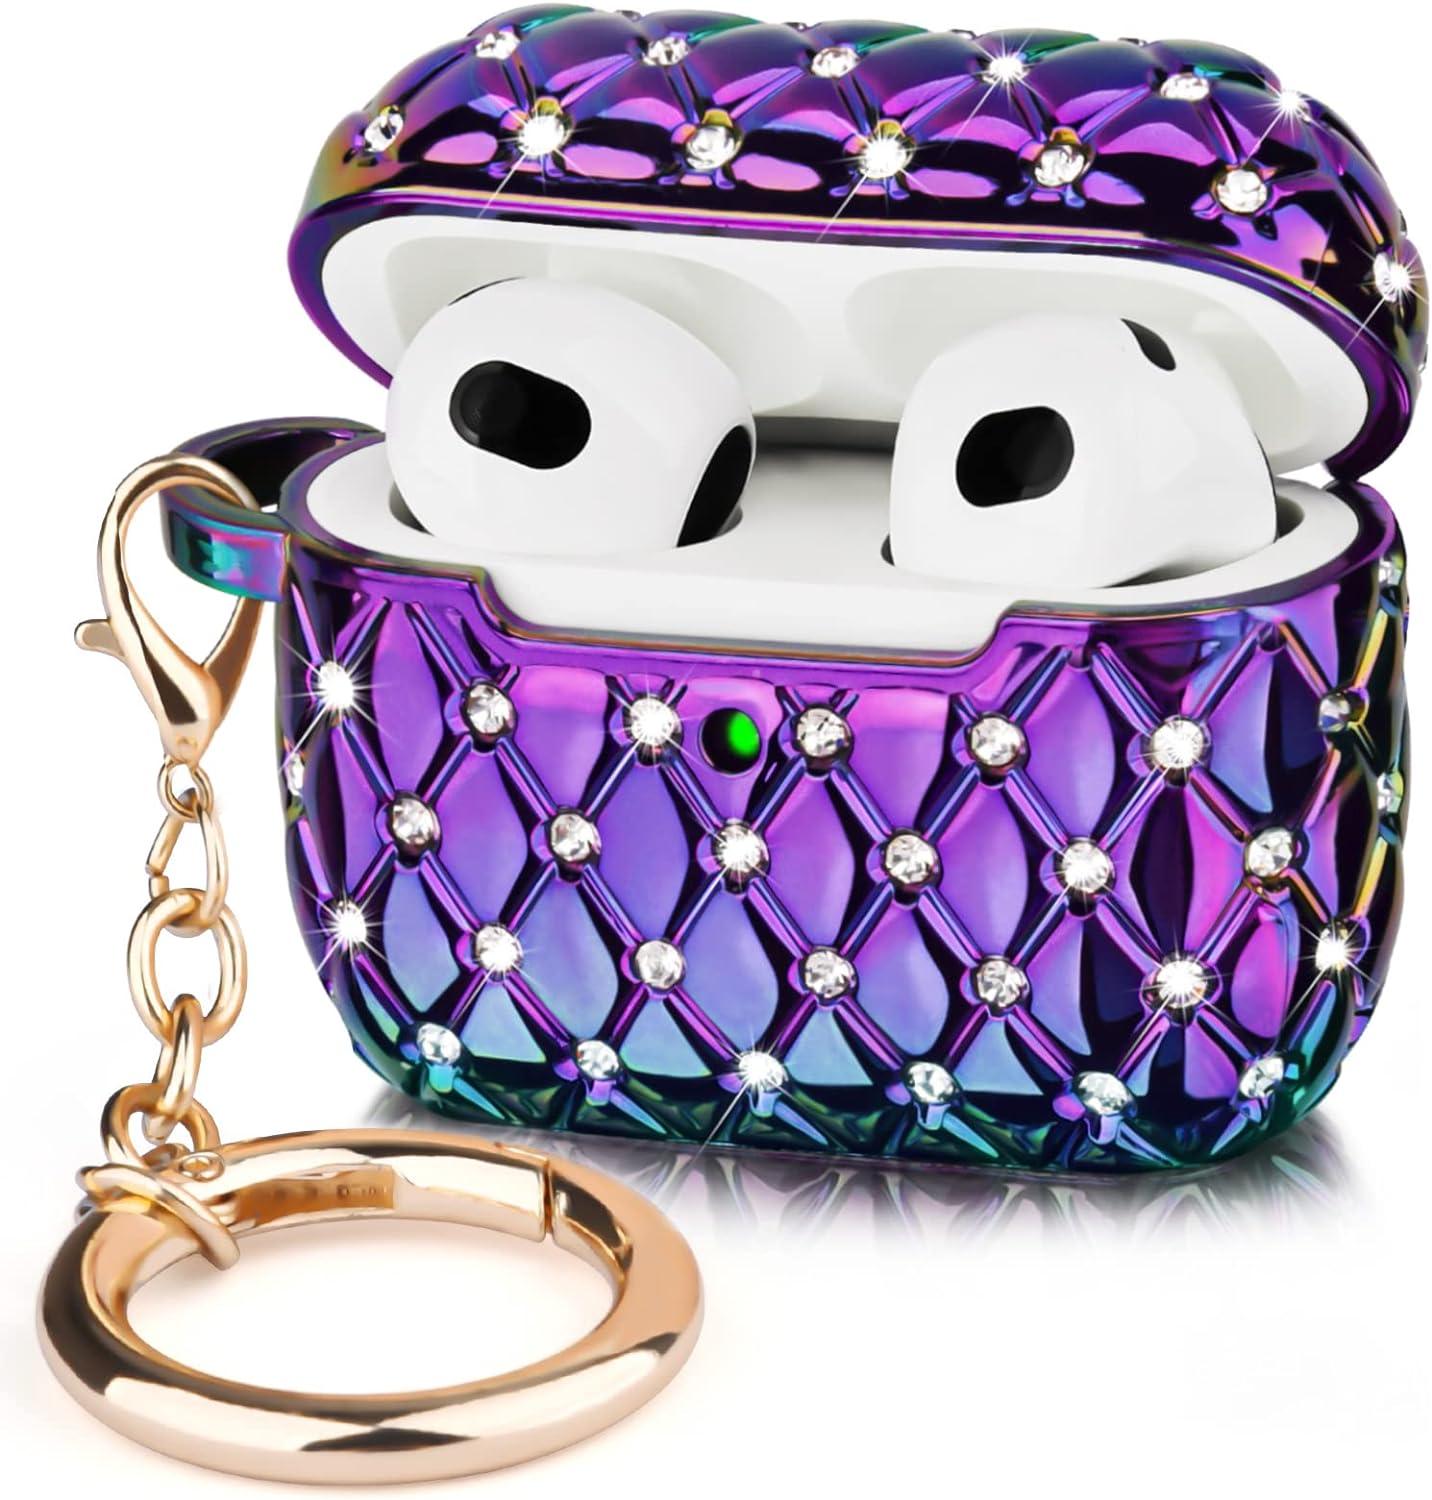 FR Fashion Co. Bling Crystal AirPods Pro Case Cover - FR Fashion Co. 